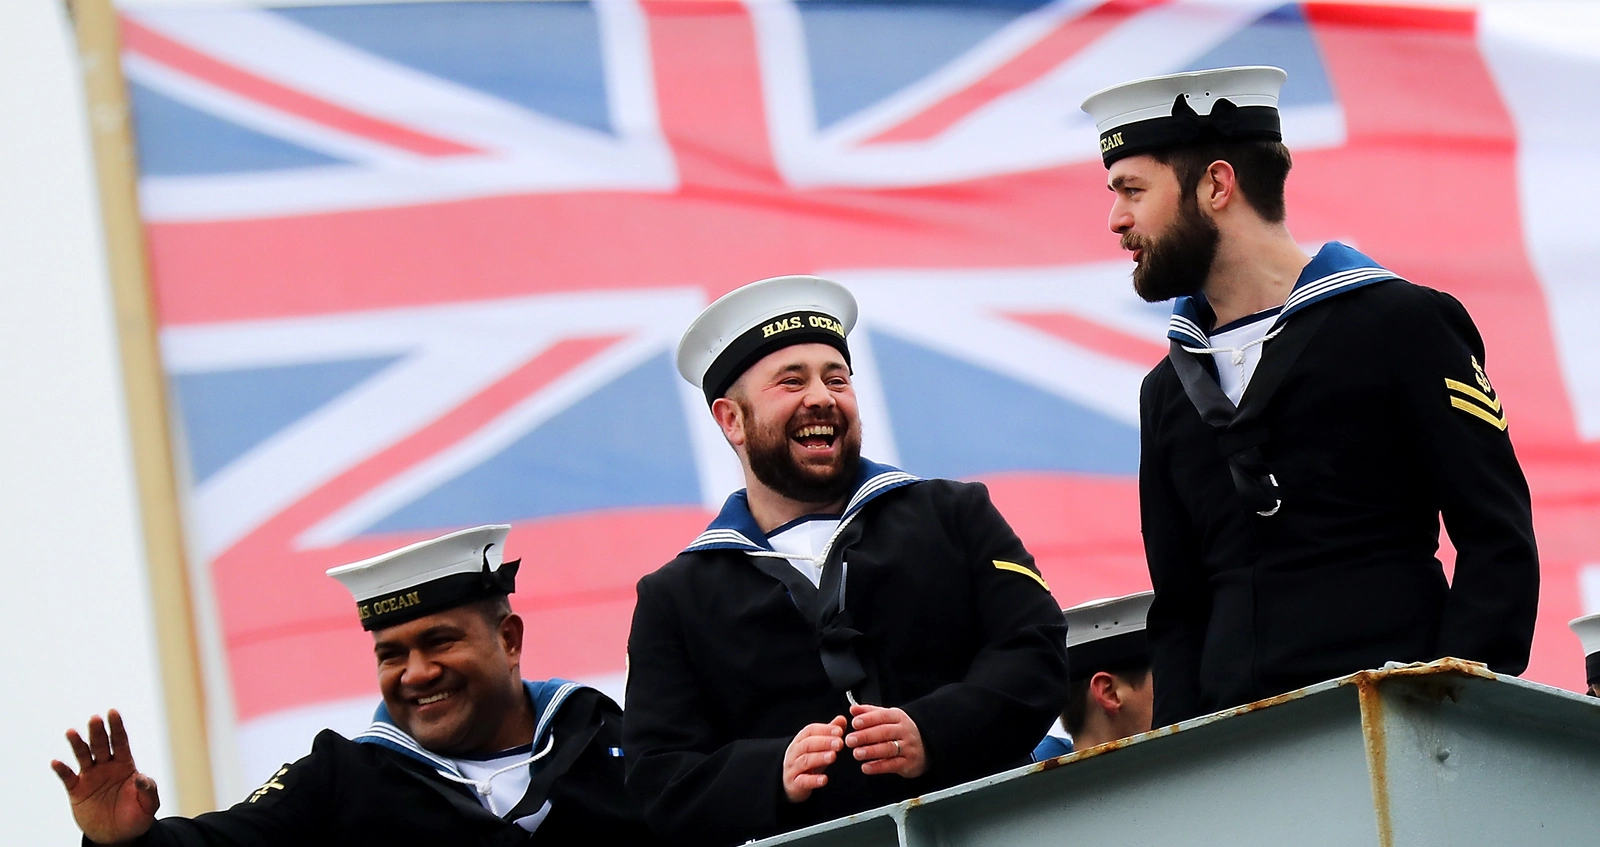 Personnel from the Royal Navy waving in front of a union jack